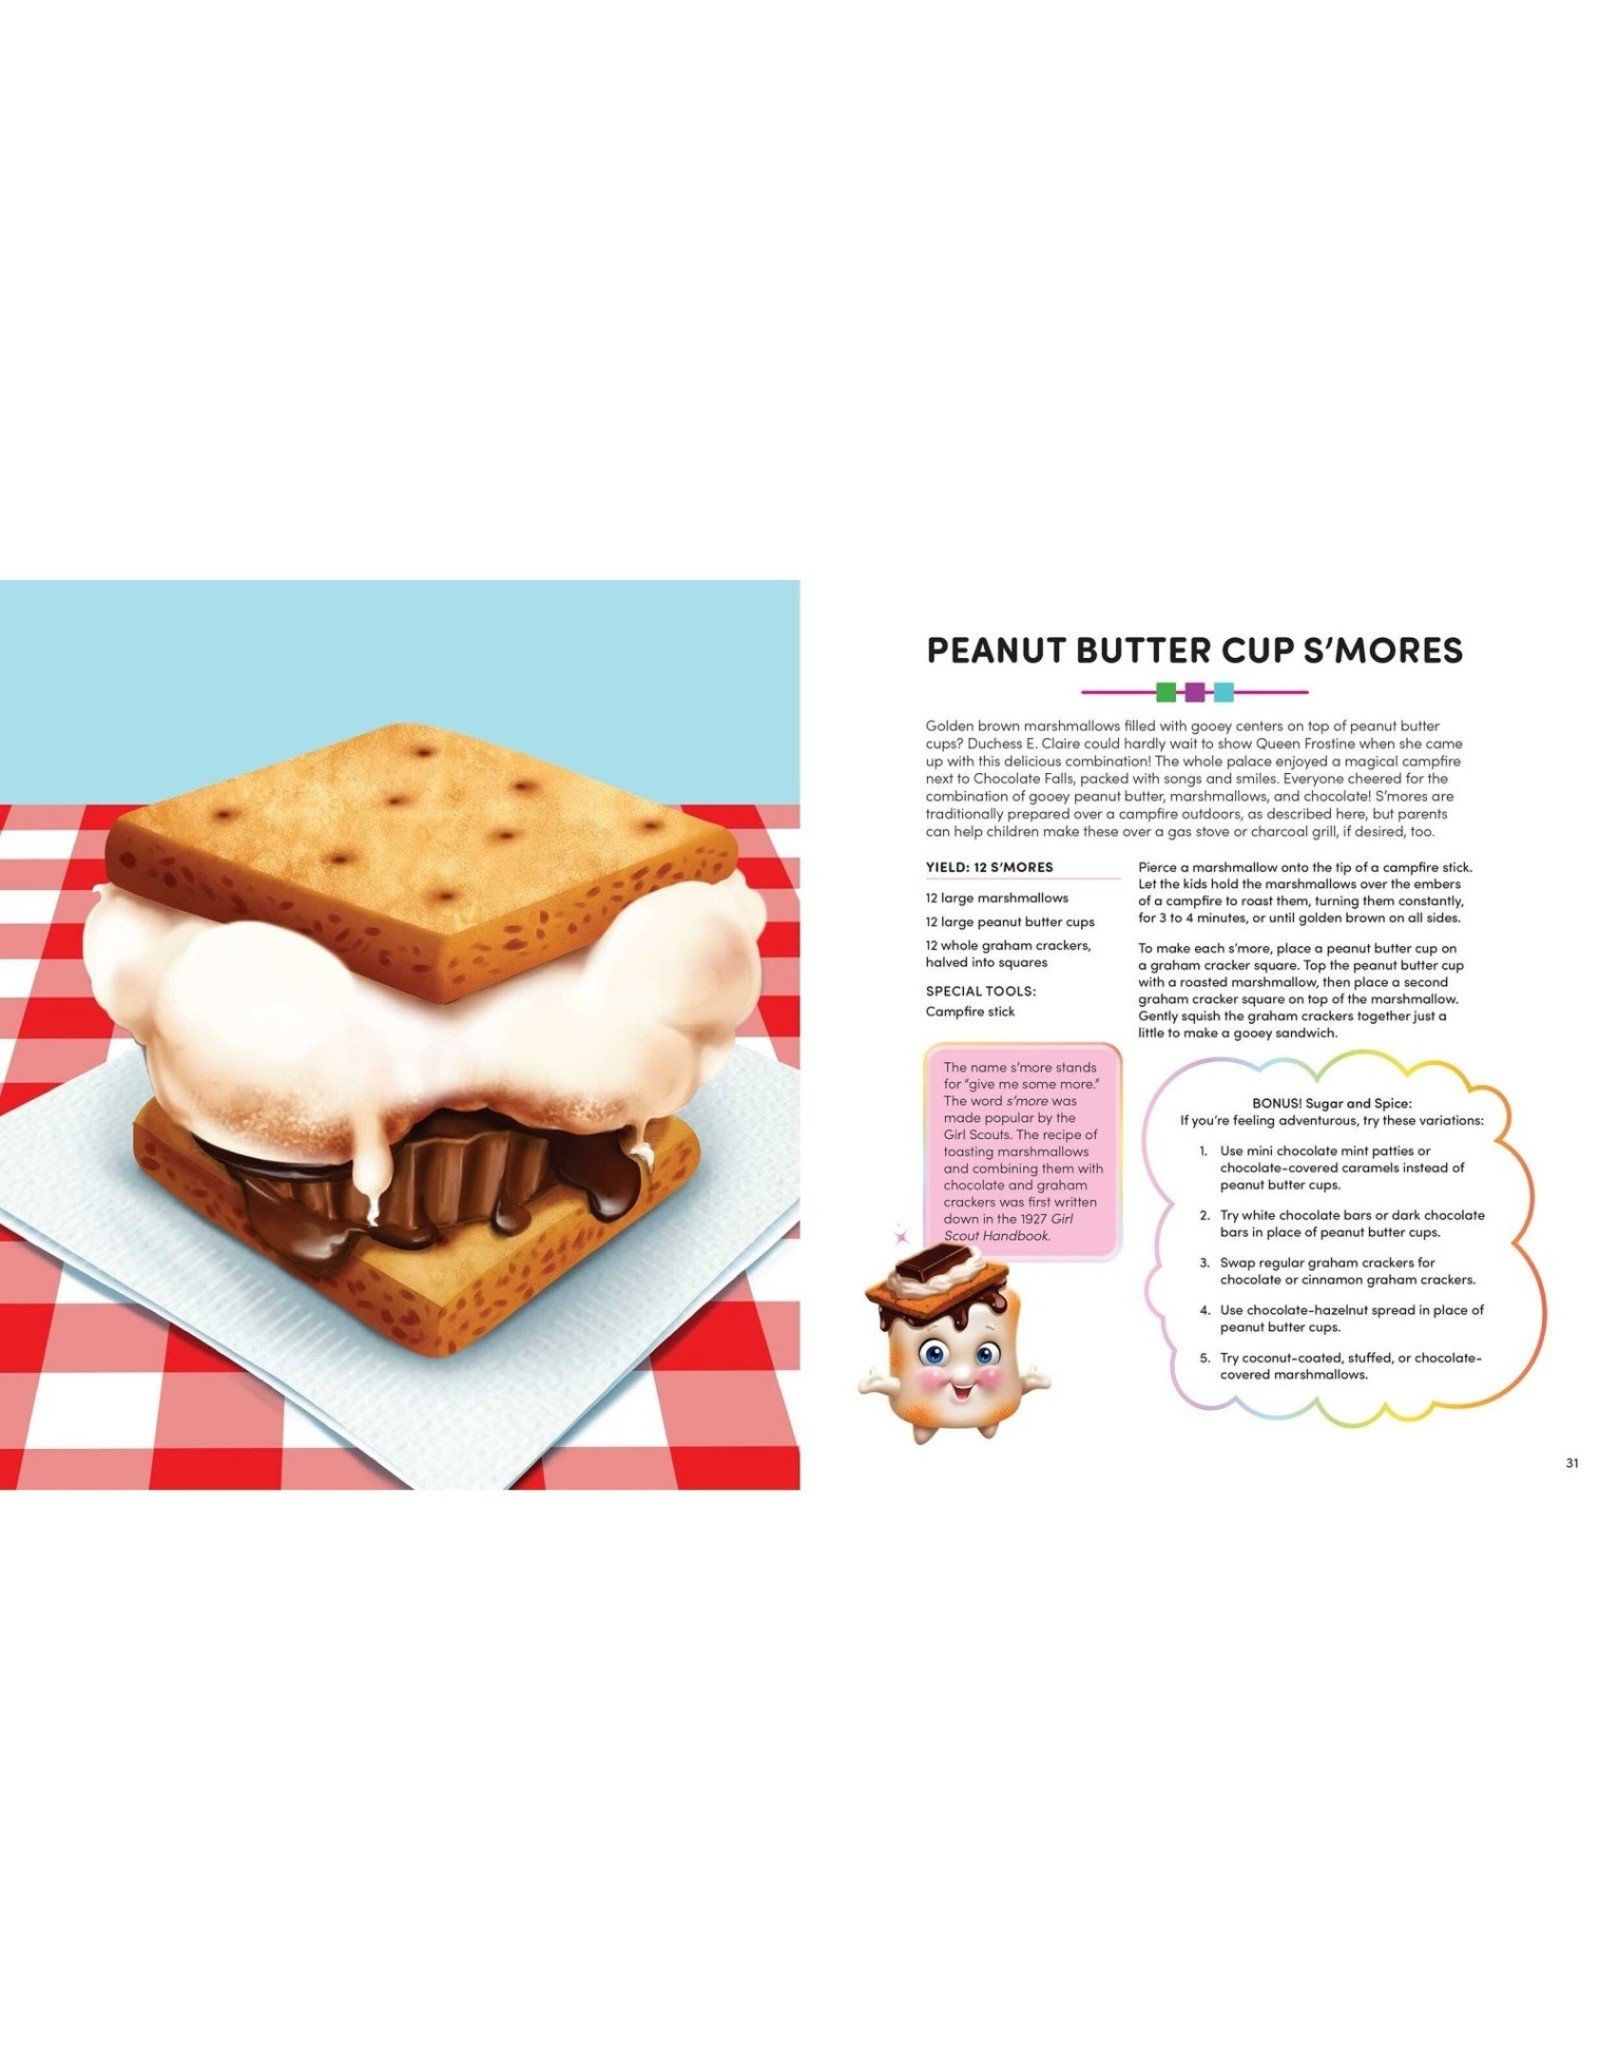 Candy Land: The Official Cookbook